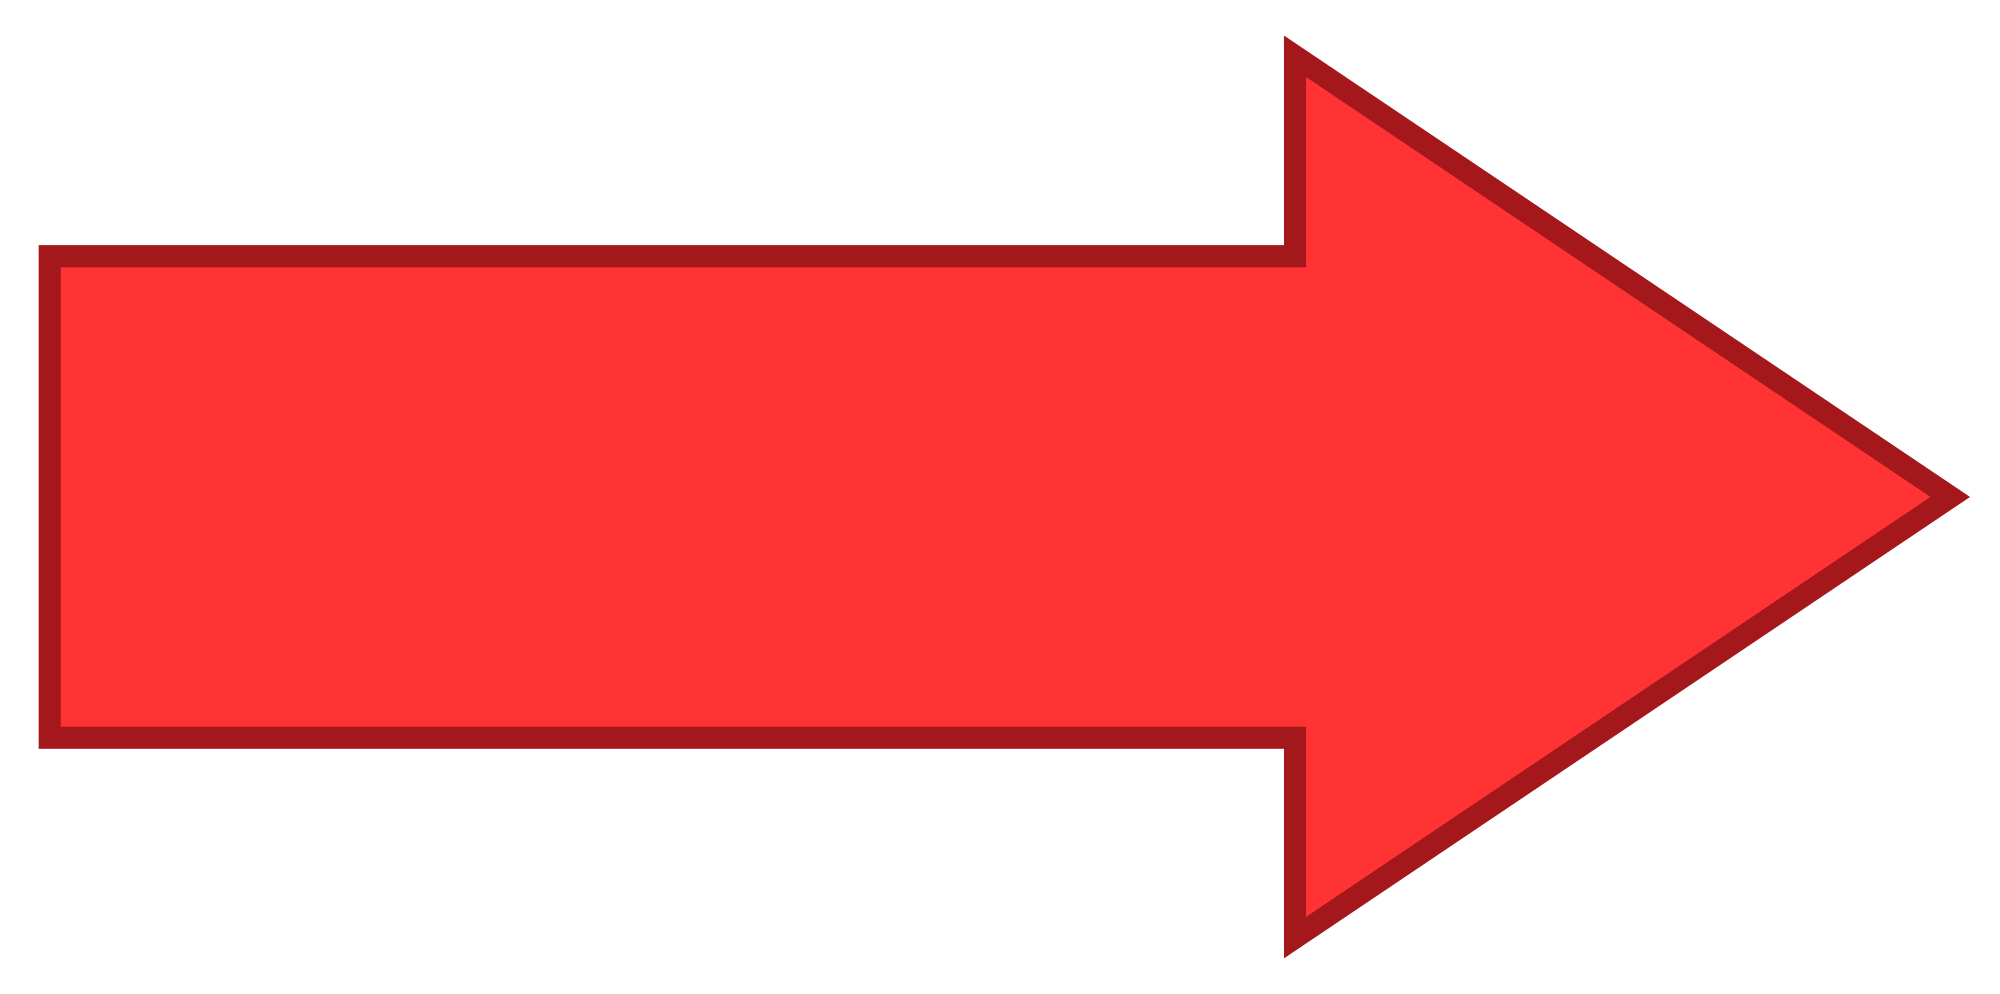 Red and Black Arrow Logo - File:Arrow facing right - Red.svg - Wikimedia Commons